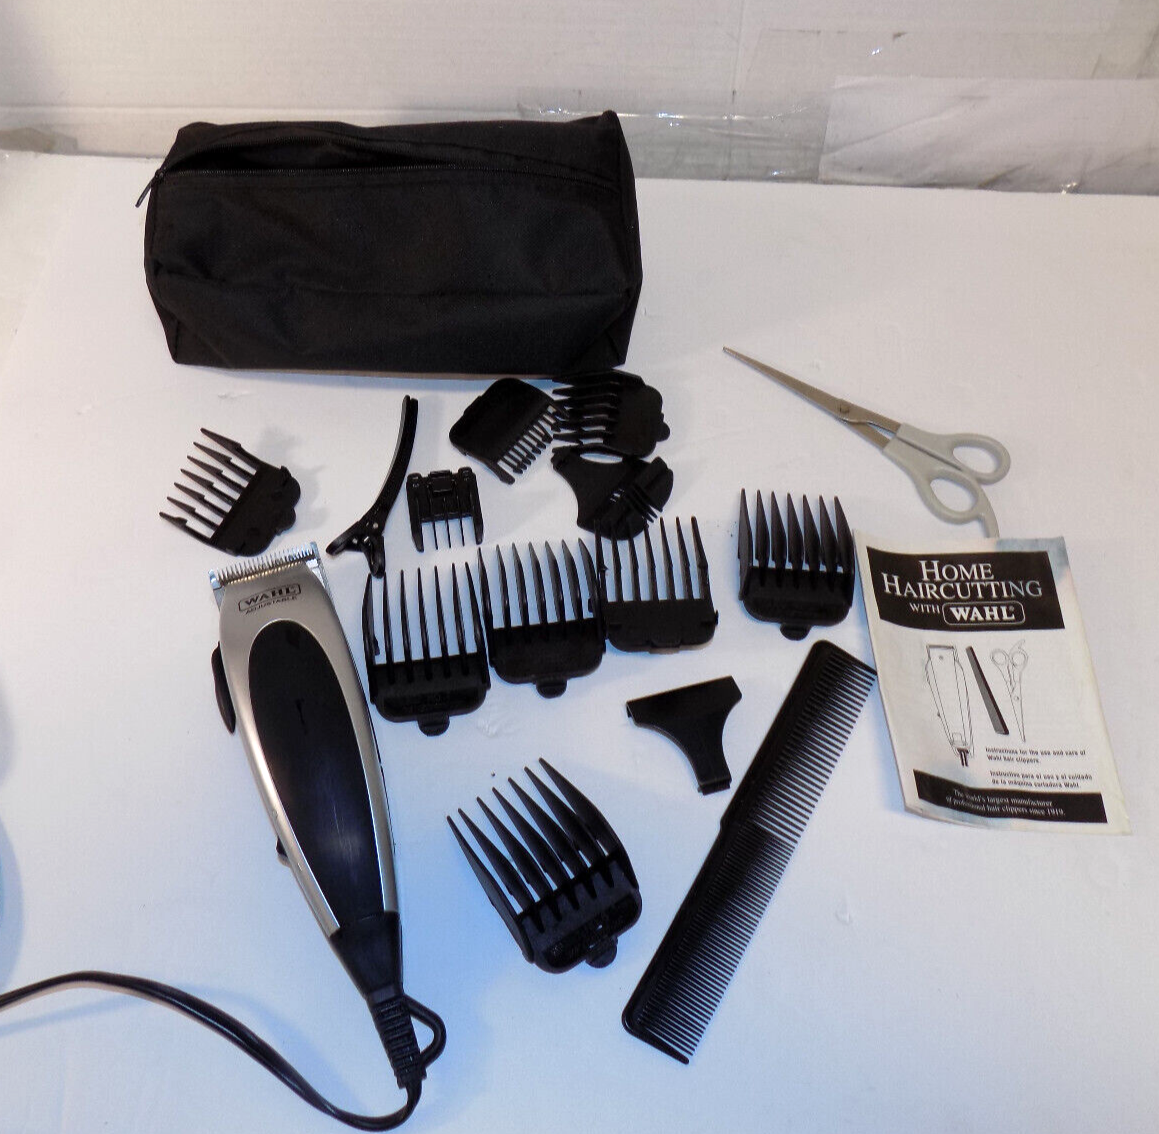 Primary image for WAHL Precision Home Hair Cutting Model # NAC Barber Clippers